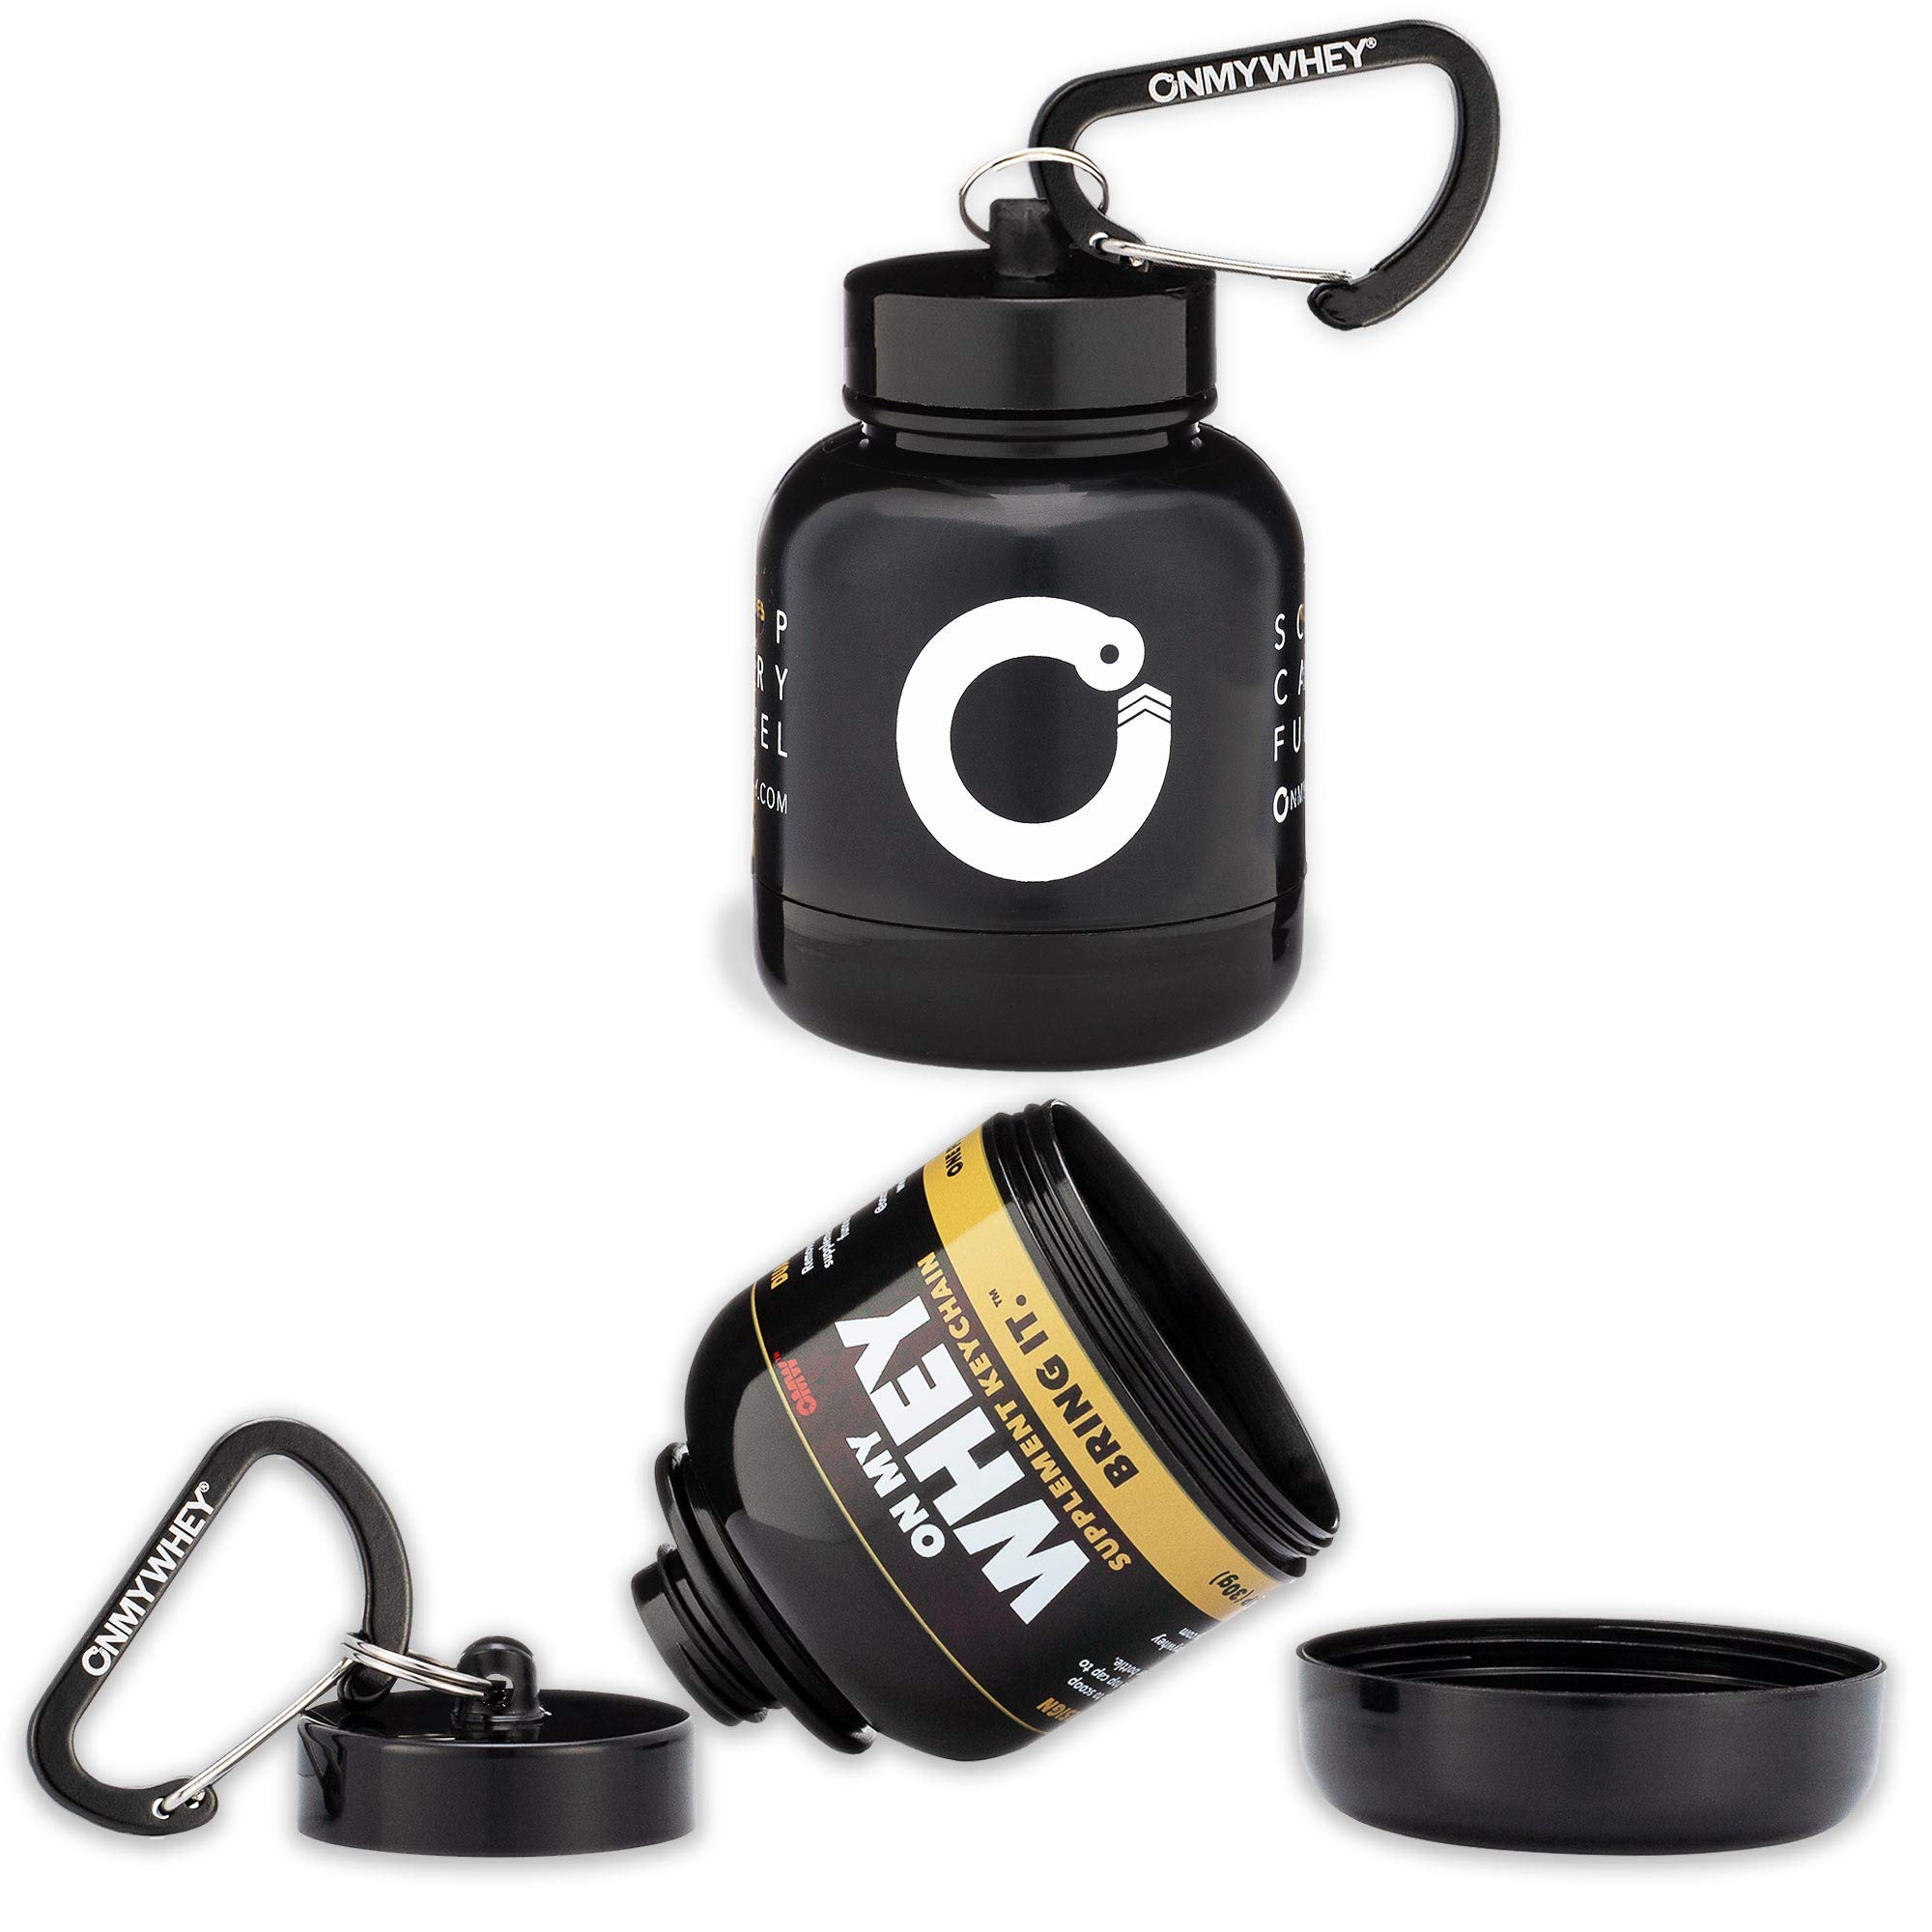 OnMyWhey - Protein Powder and Supplement Funnel Keychain, Portable to-Go Container for The Gym, Workouts, Fitness, and Travel - TSA Approved, Combo 2-Pack w/ 1 Modern & 1 Classic